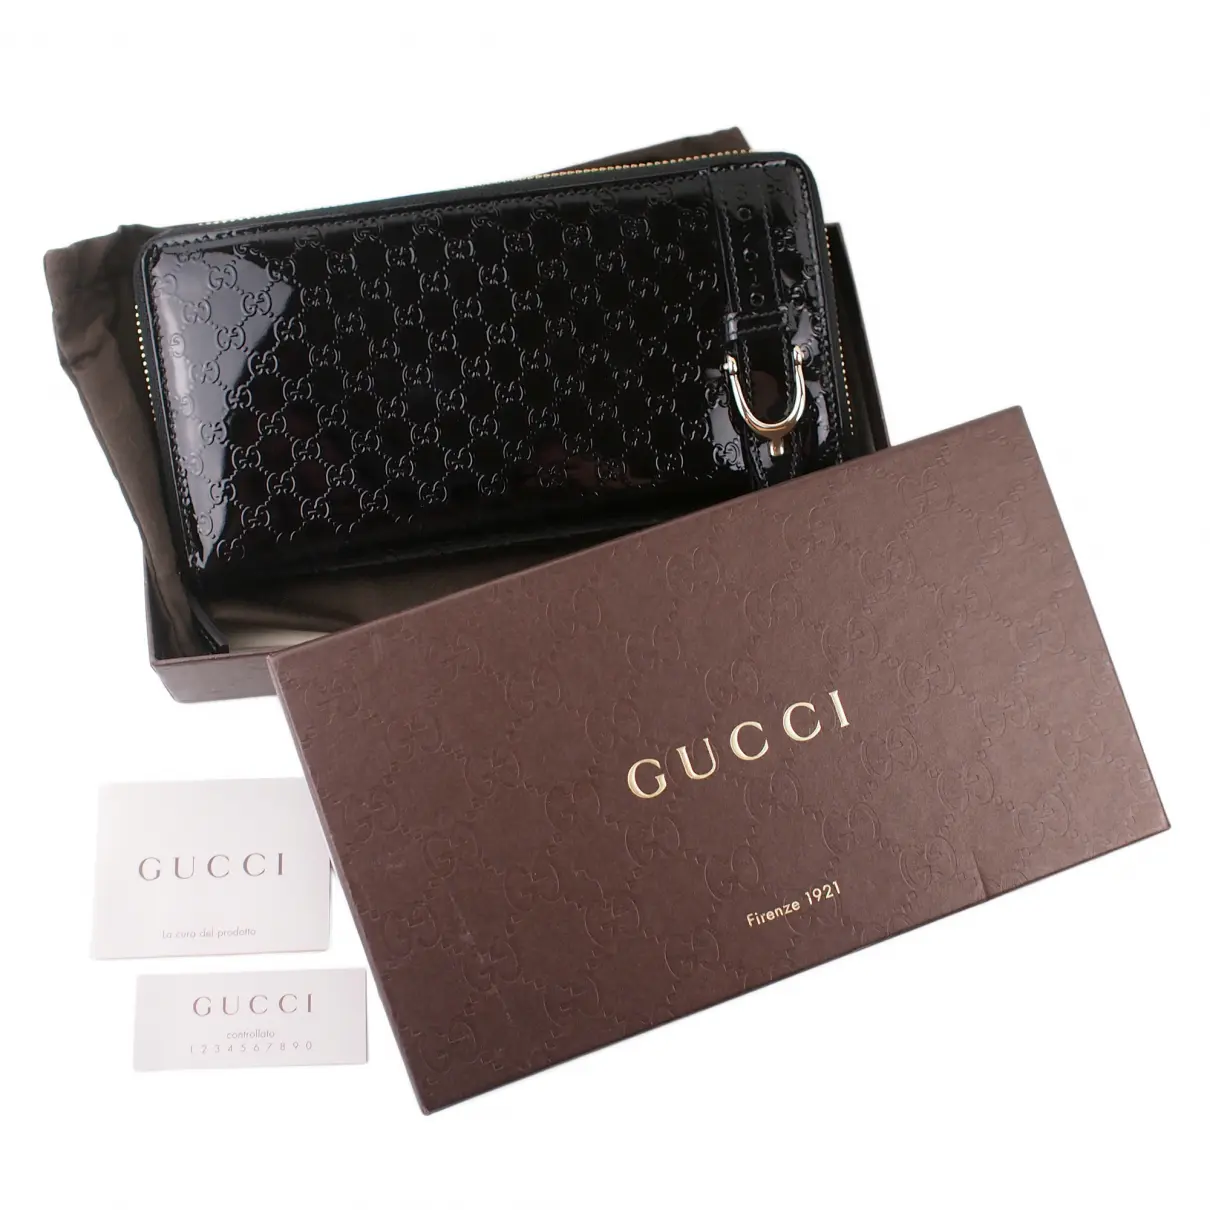 Buy Gucci Patent leather purse online